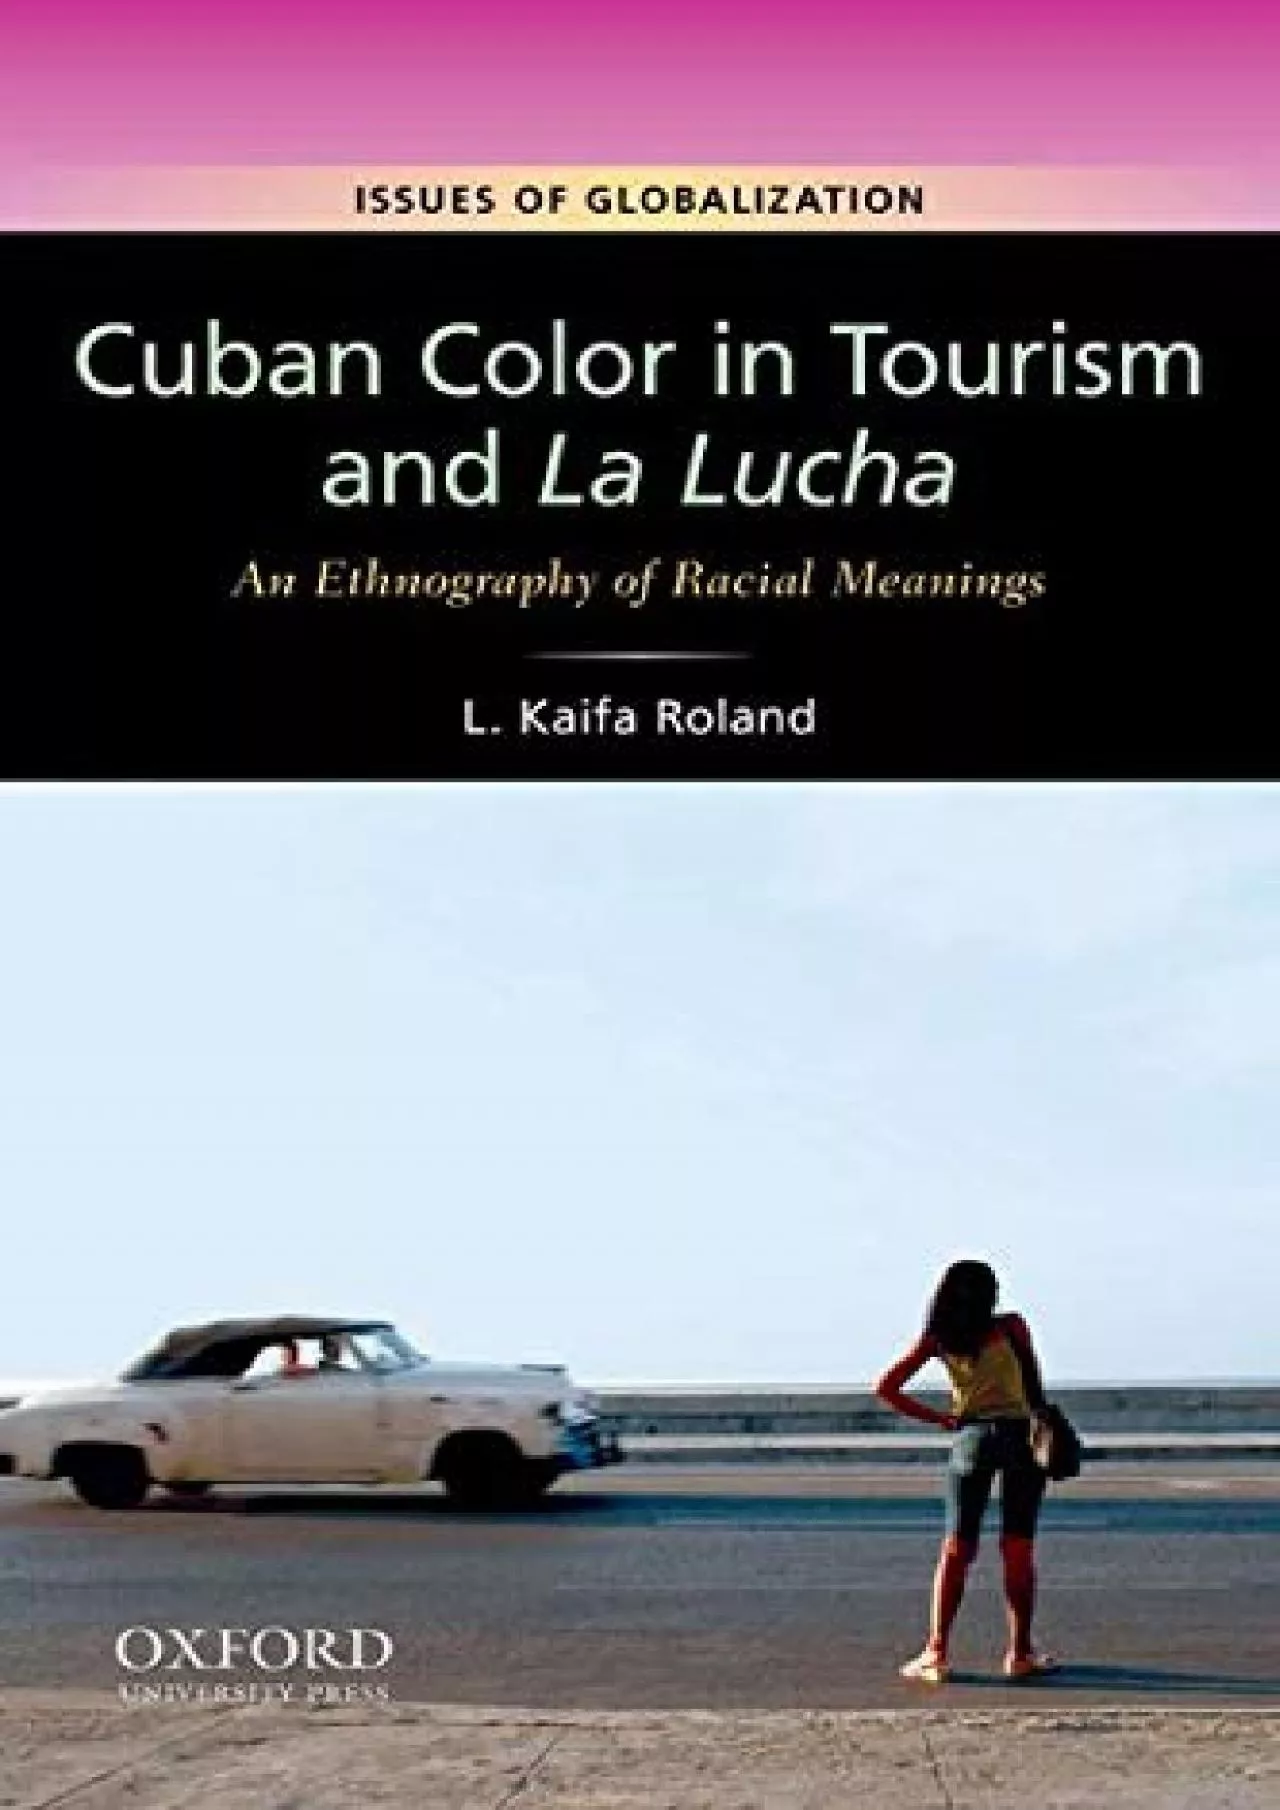 (EBOOK)-Cuban Color in Tourism and La Lucha: An Ethnography of Racial Meanings (Issues